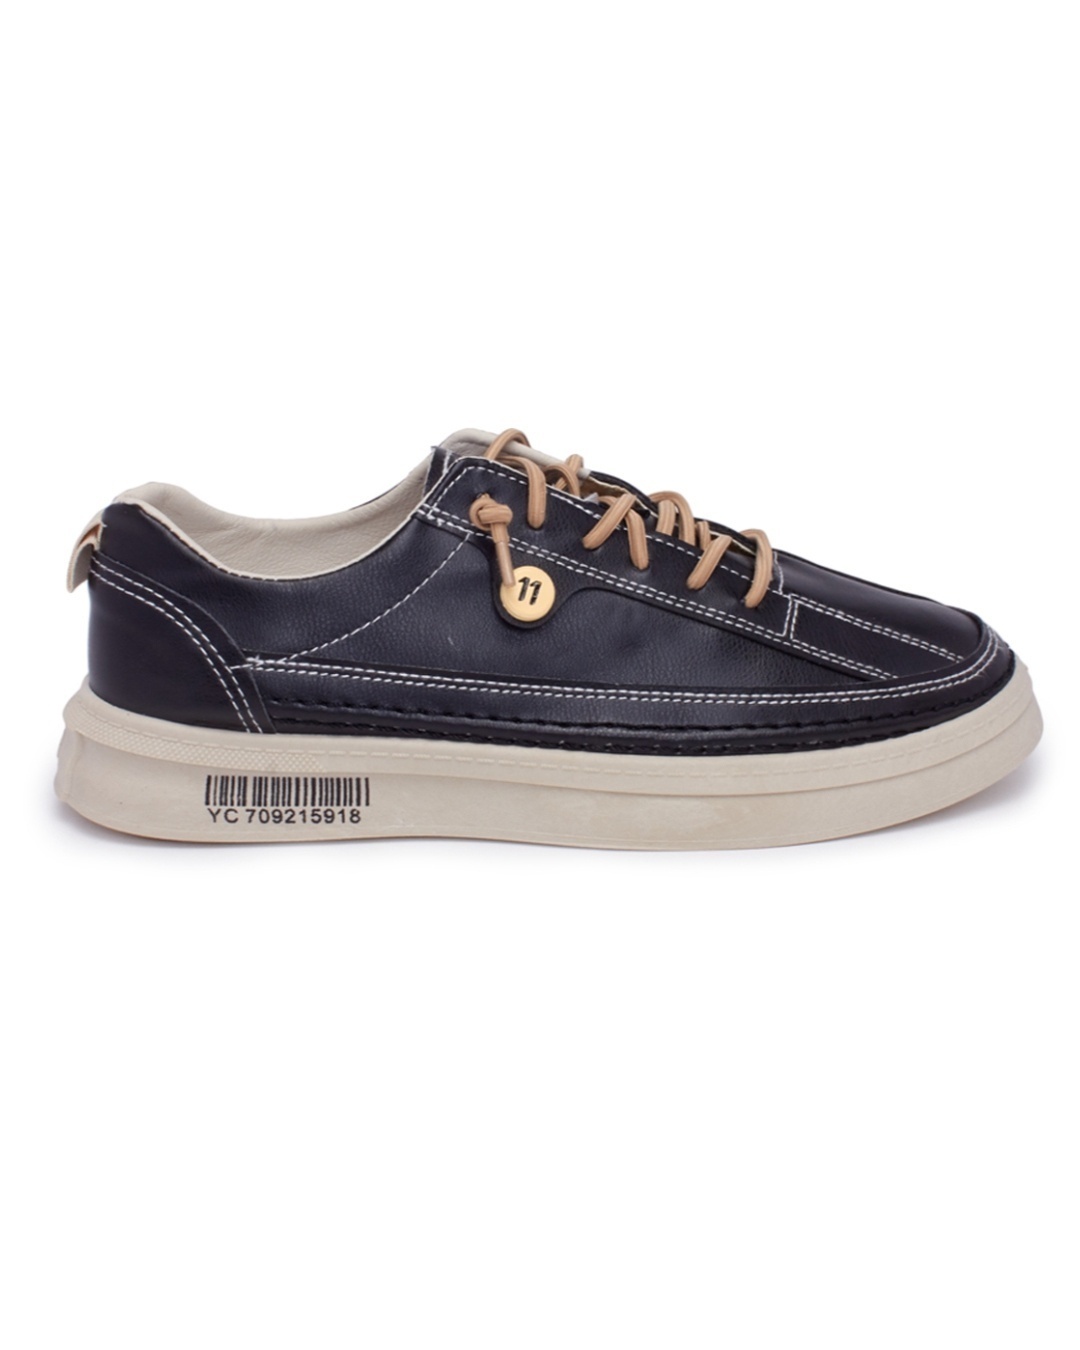 Buy Men's Black Lace-Ups Casual Shoes Online in India at Bewakoof